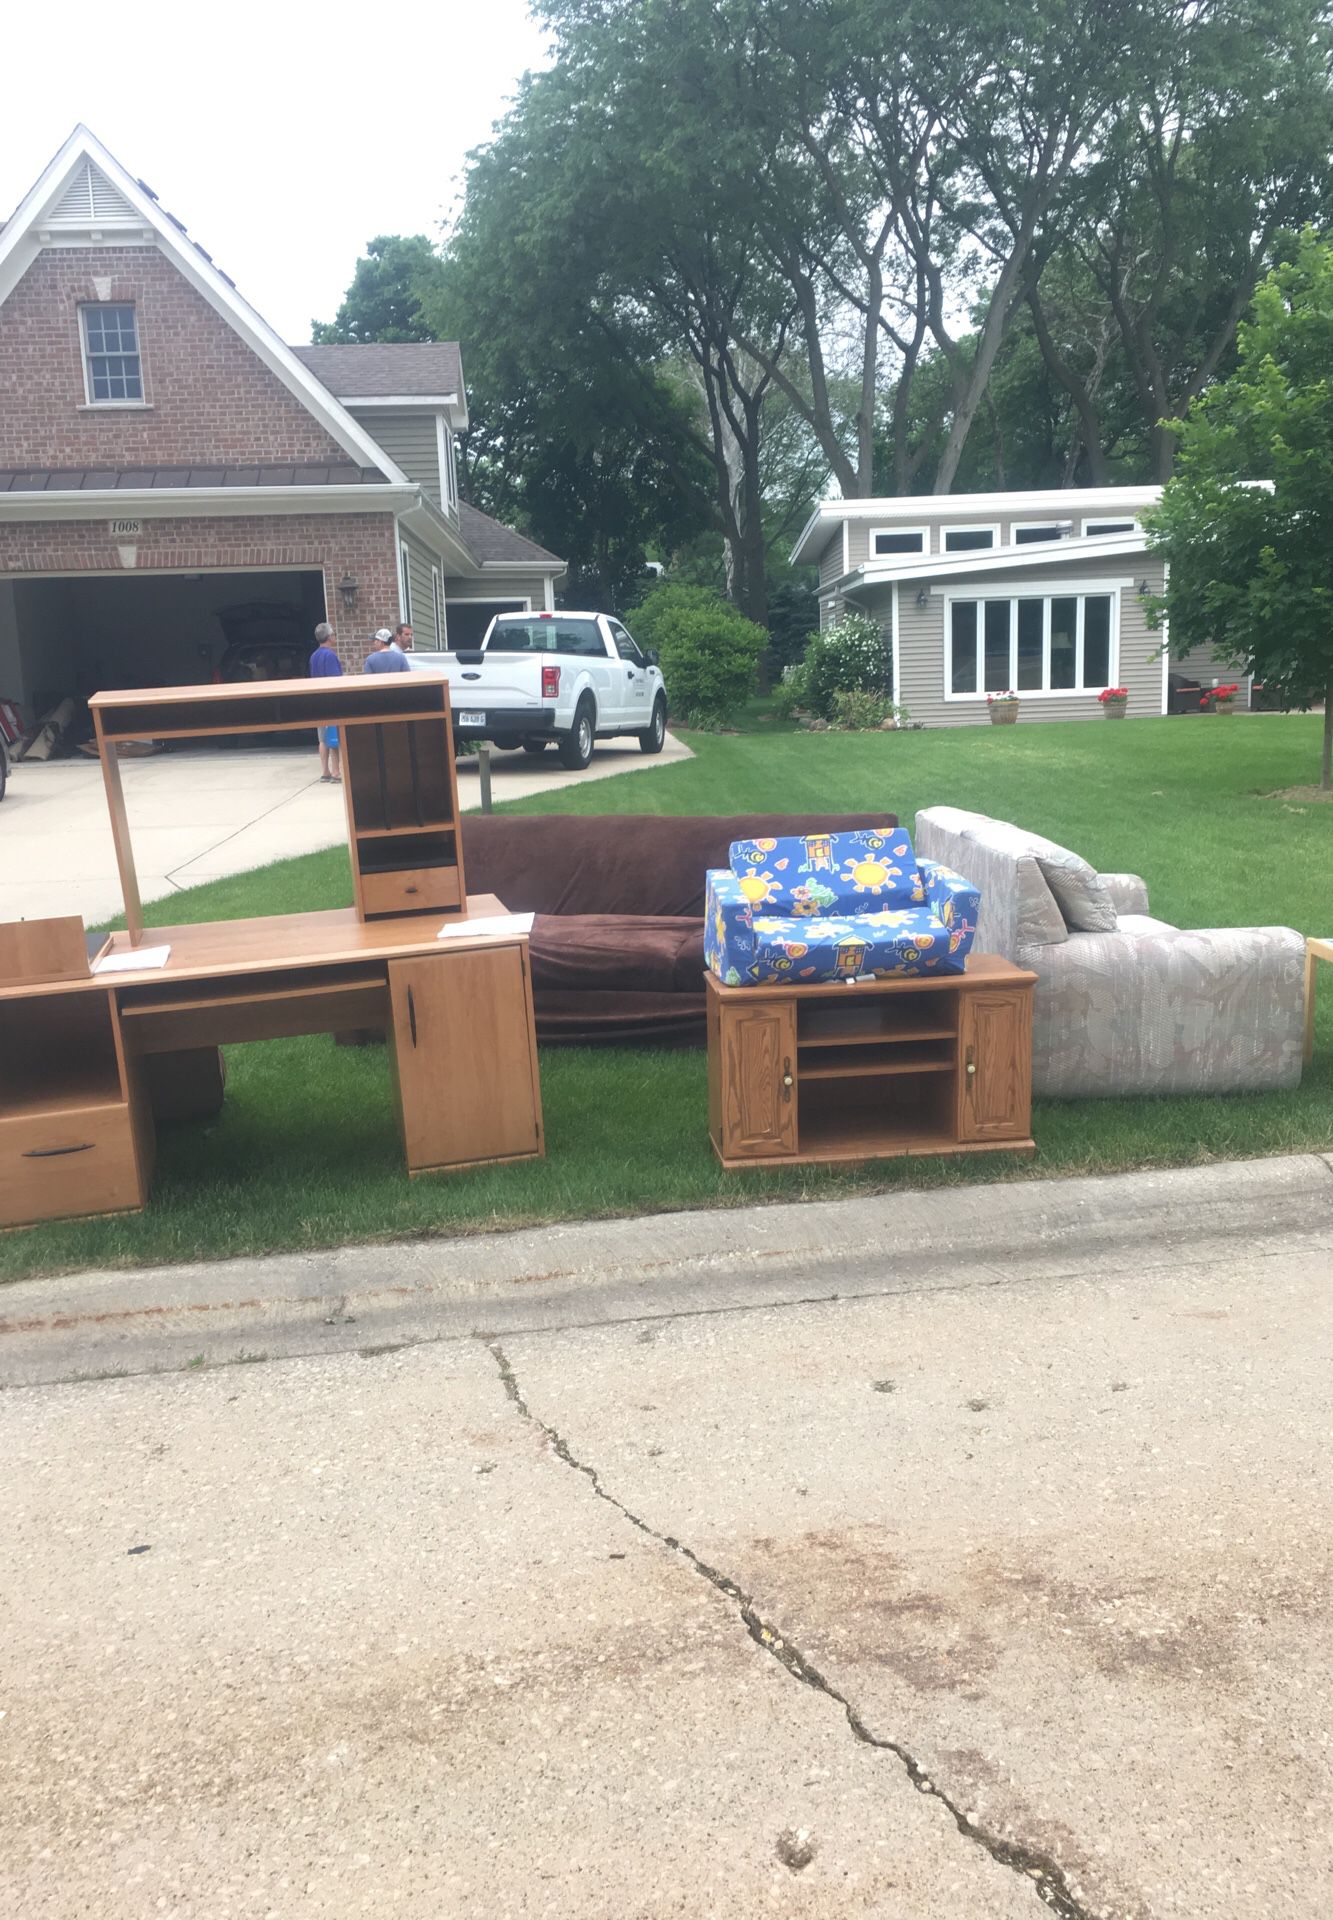 Miscellaneous items free at curb. Desk, couches tv stand